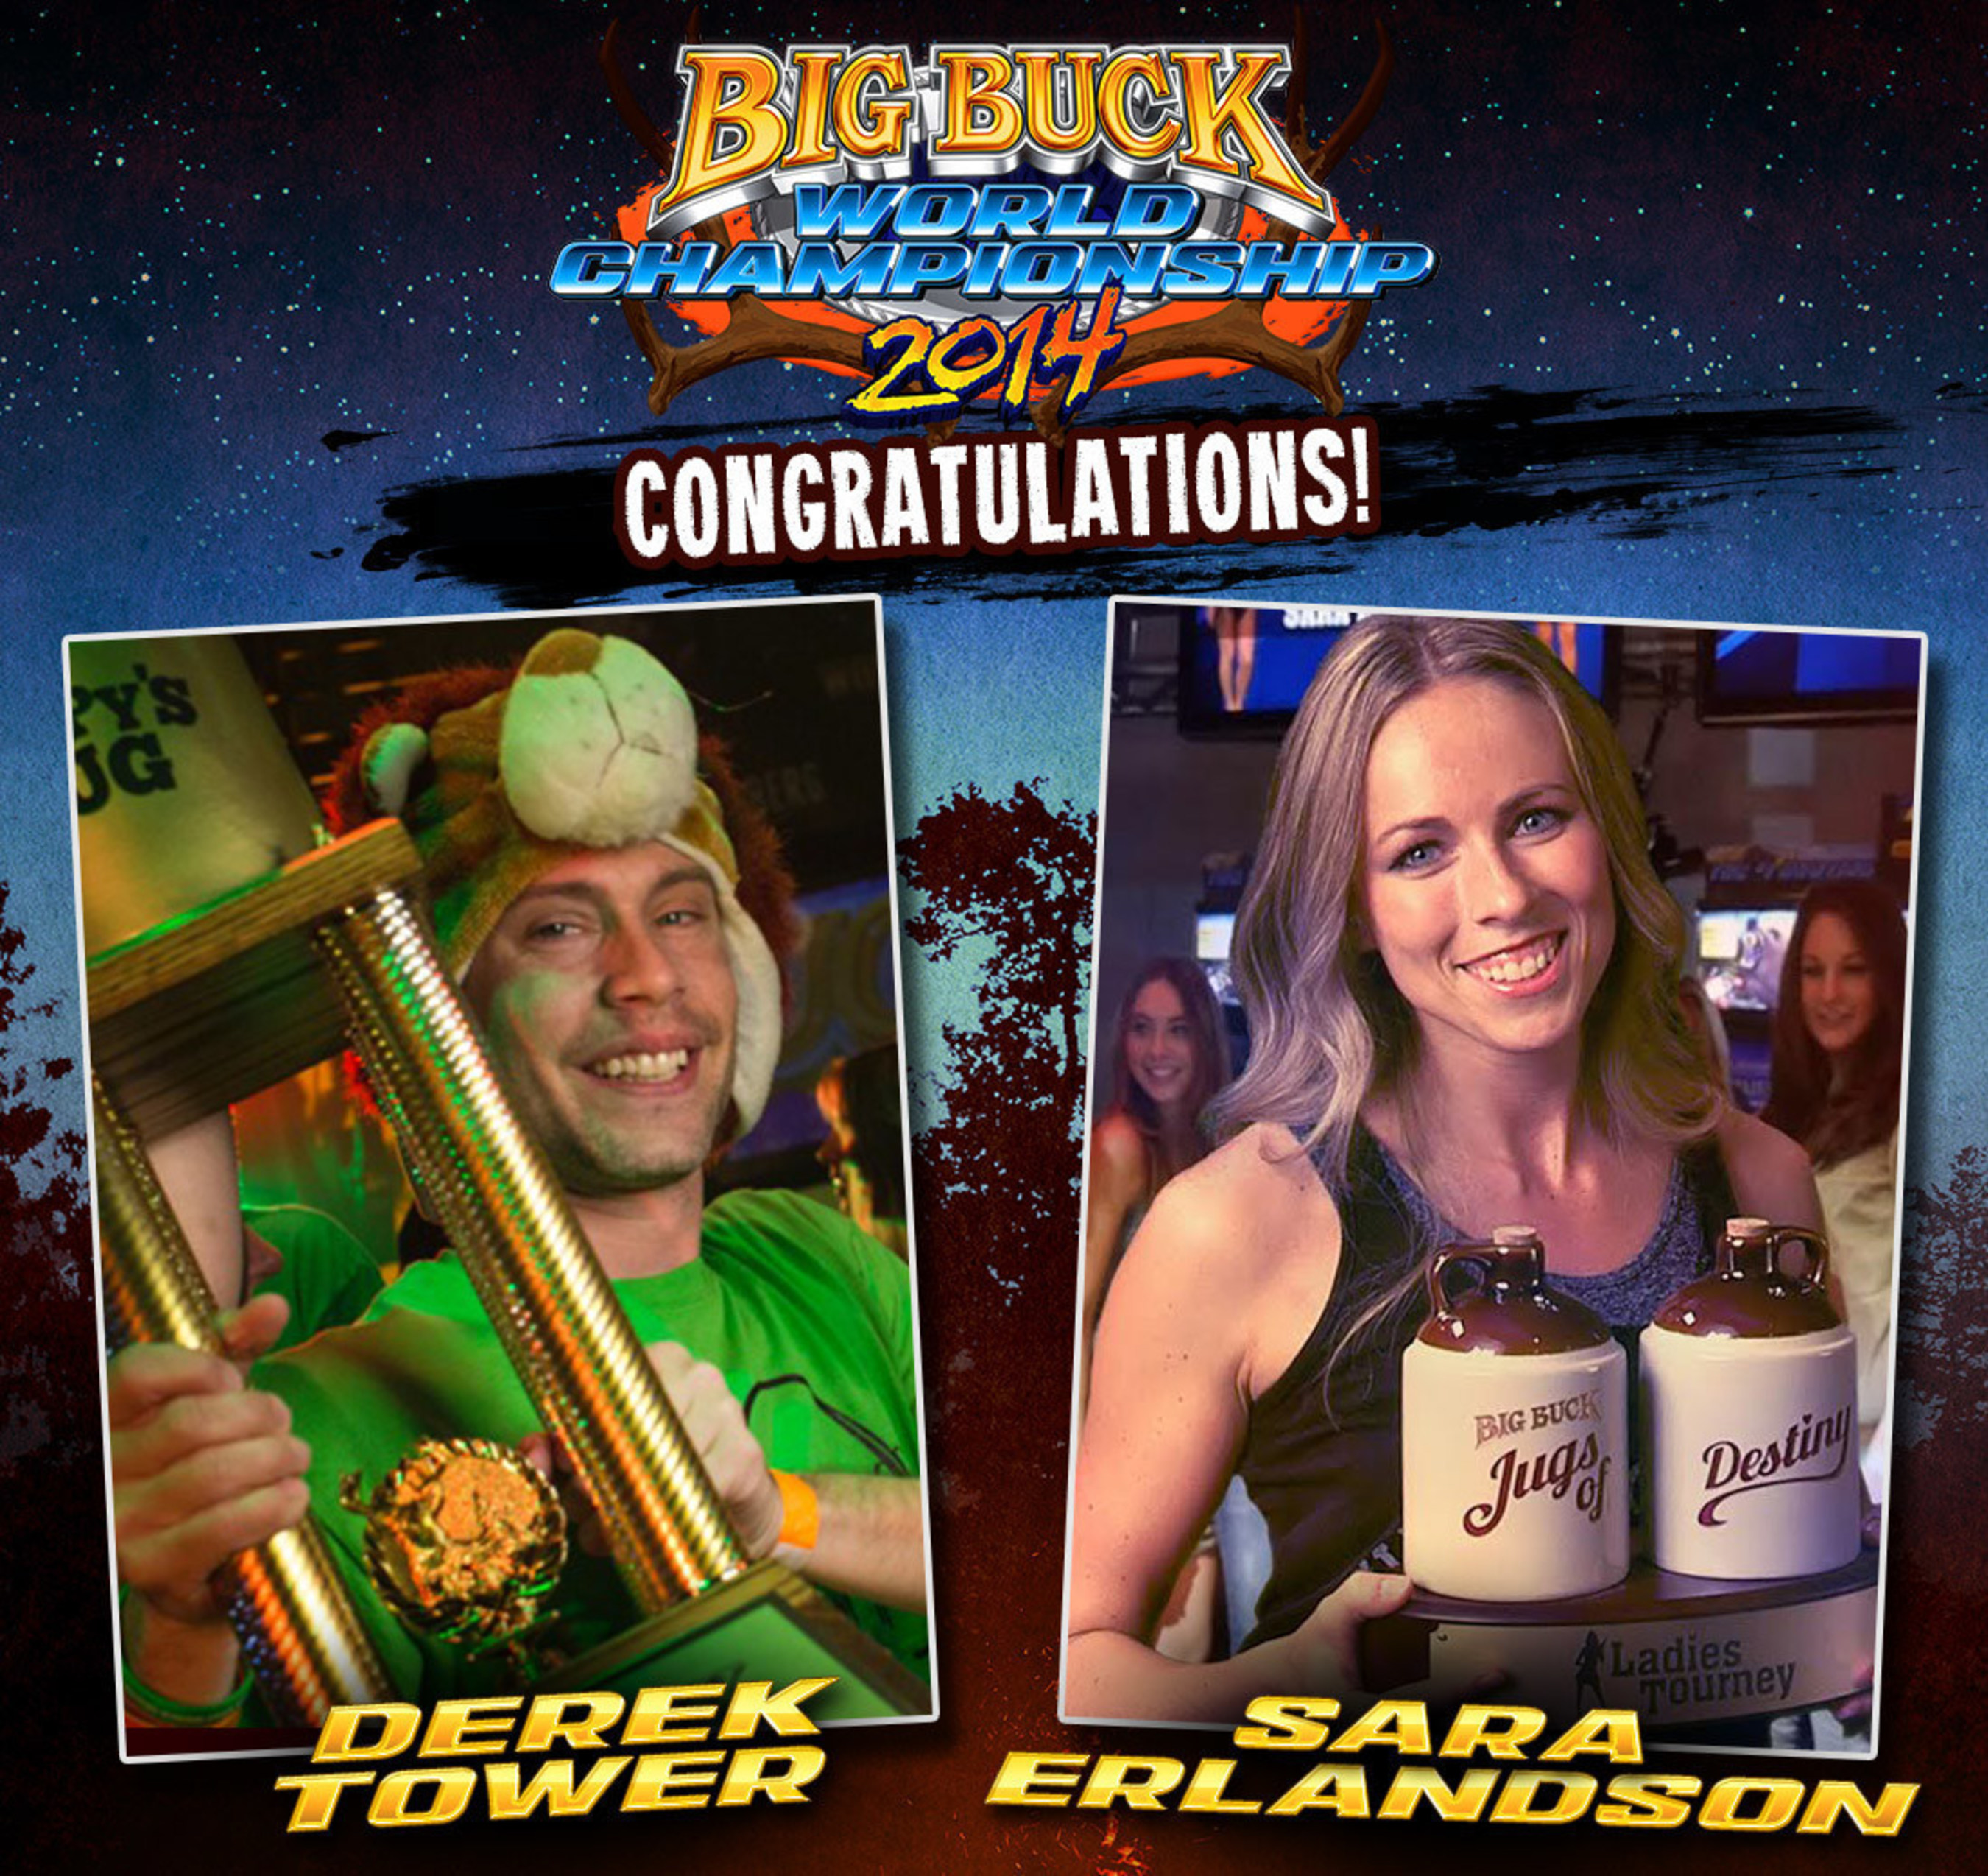 2014 Big Buck World Championship Winners, Sara Erlandson and Derek Tower! Sara Erlandson took home $5,000 in cash and the infamous Jugs of Destiny, while Derek Tower walked away with $15,000 big bucks and the legendary Pappy's Jug!